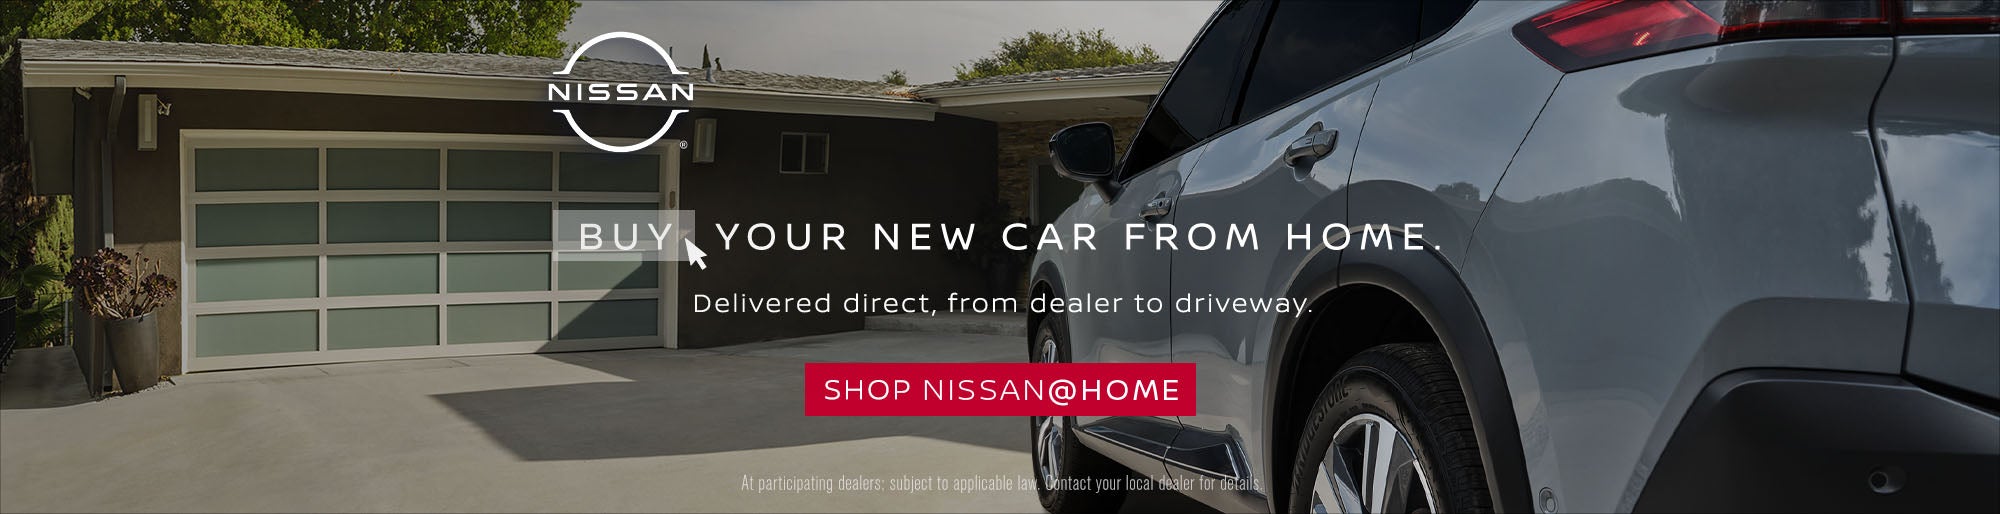 nissan buy from home